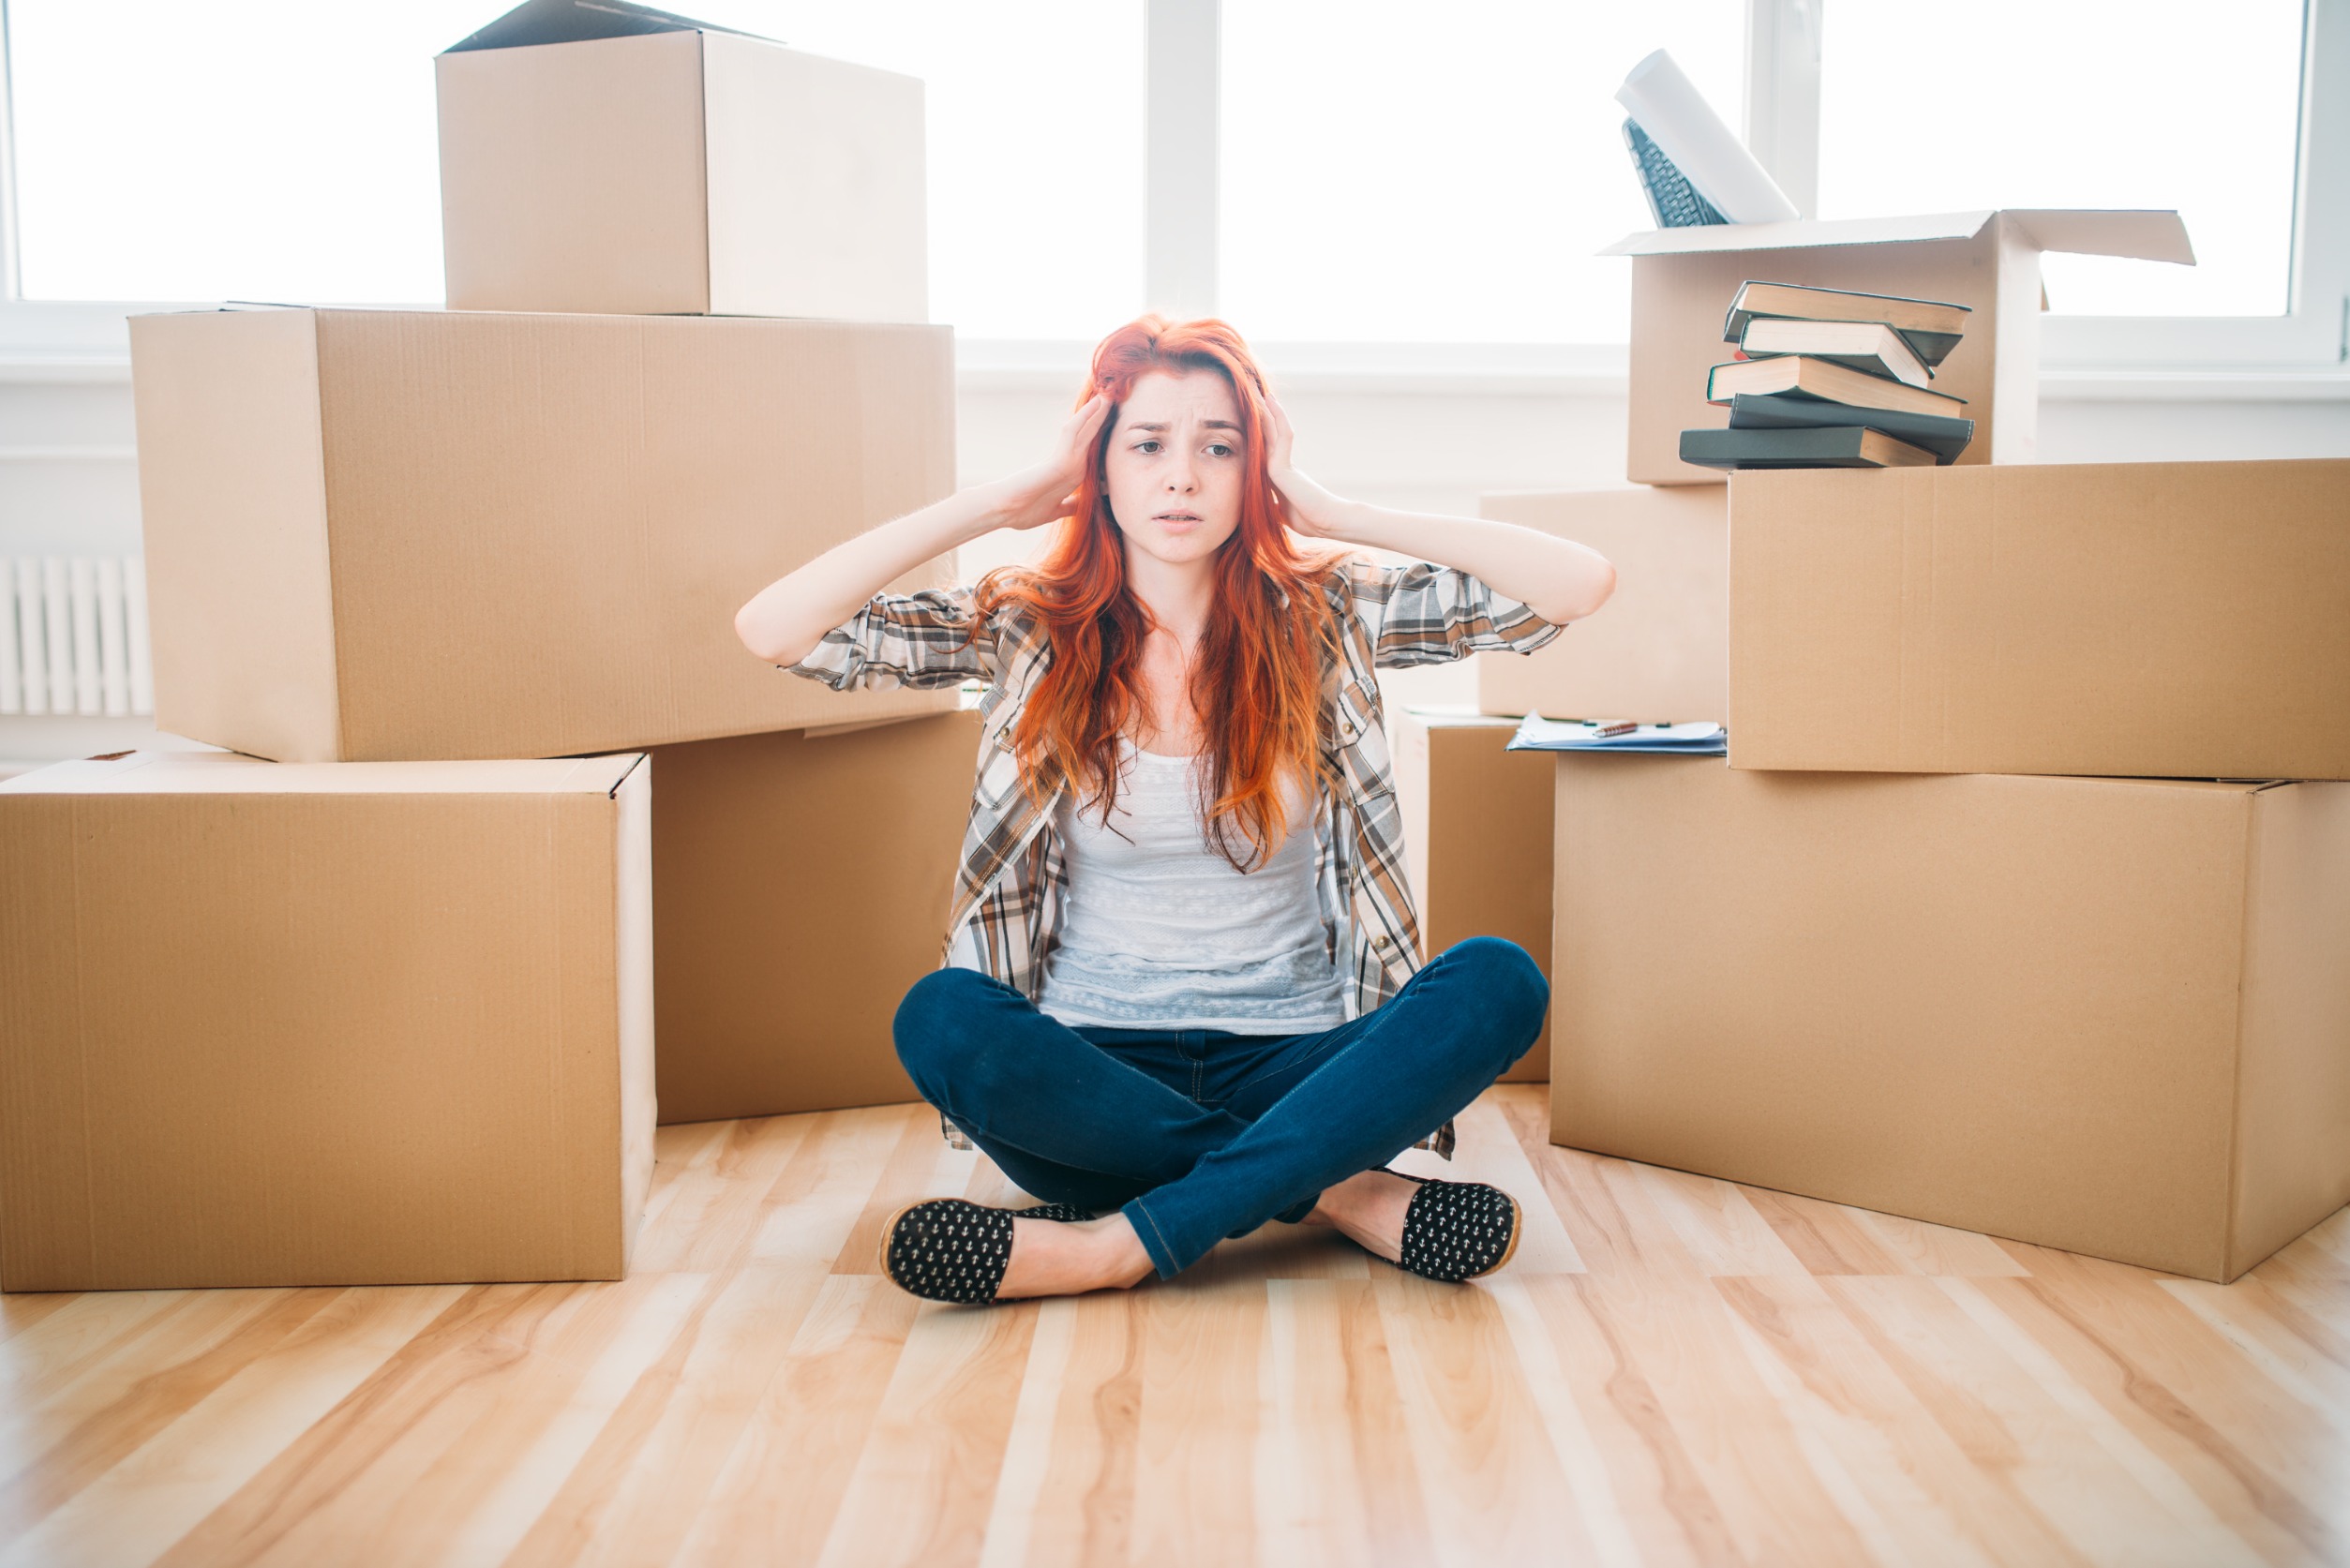 7 Tips For Managing Moving House Stress And Anxiety